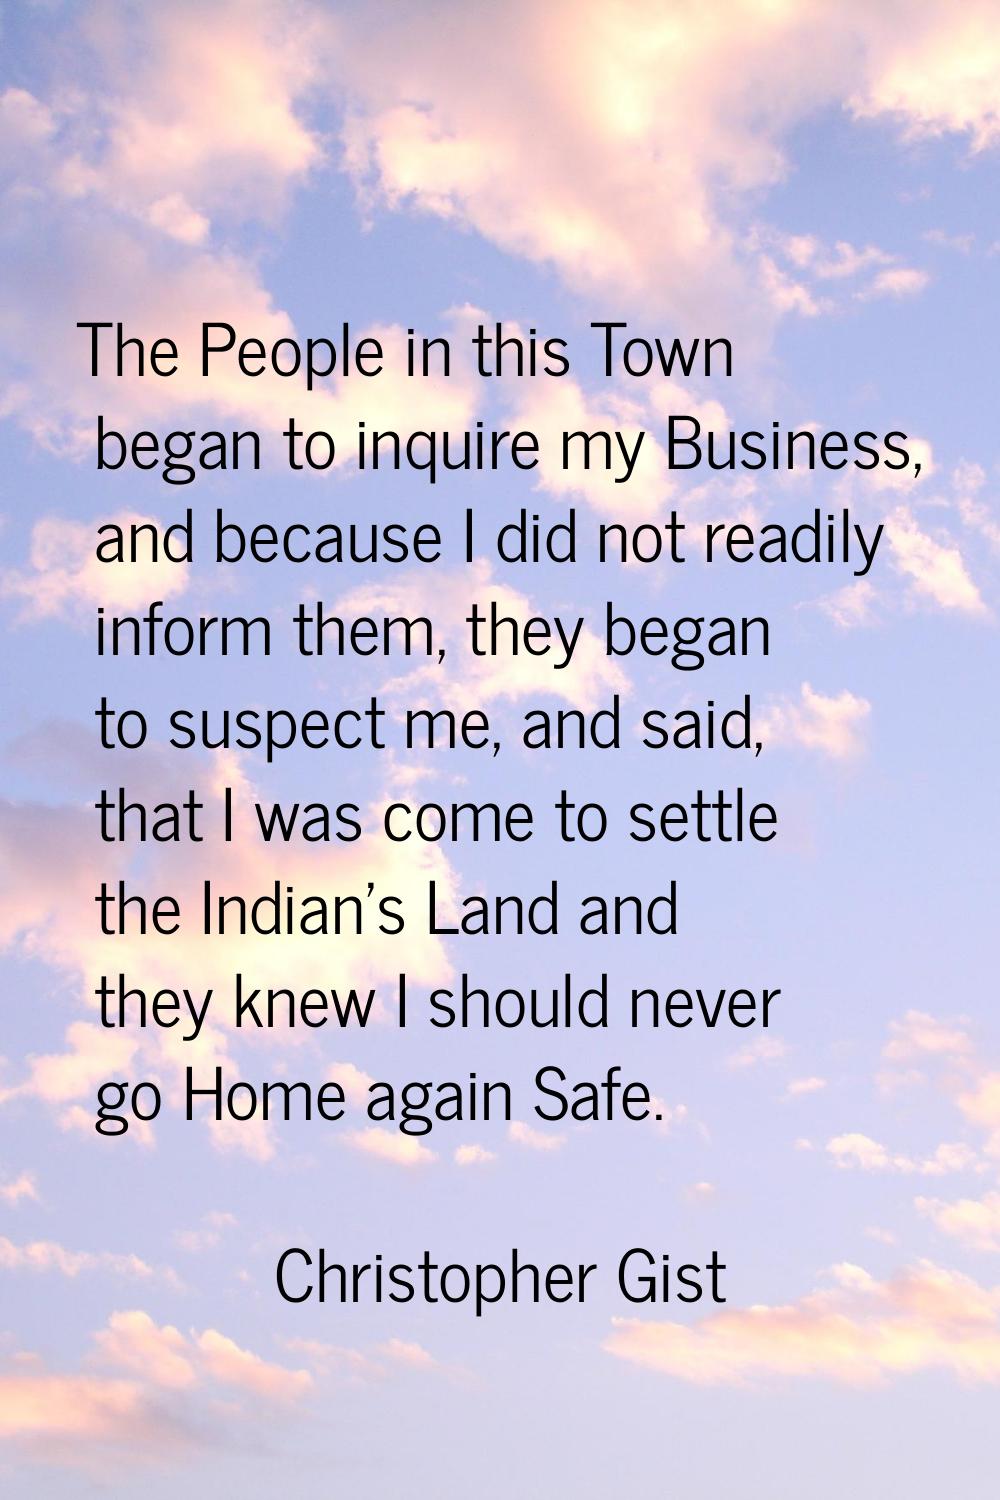 The People in this Town began to inquire my Business, and because I did not readily inform them, th